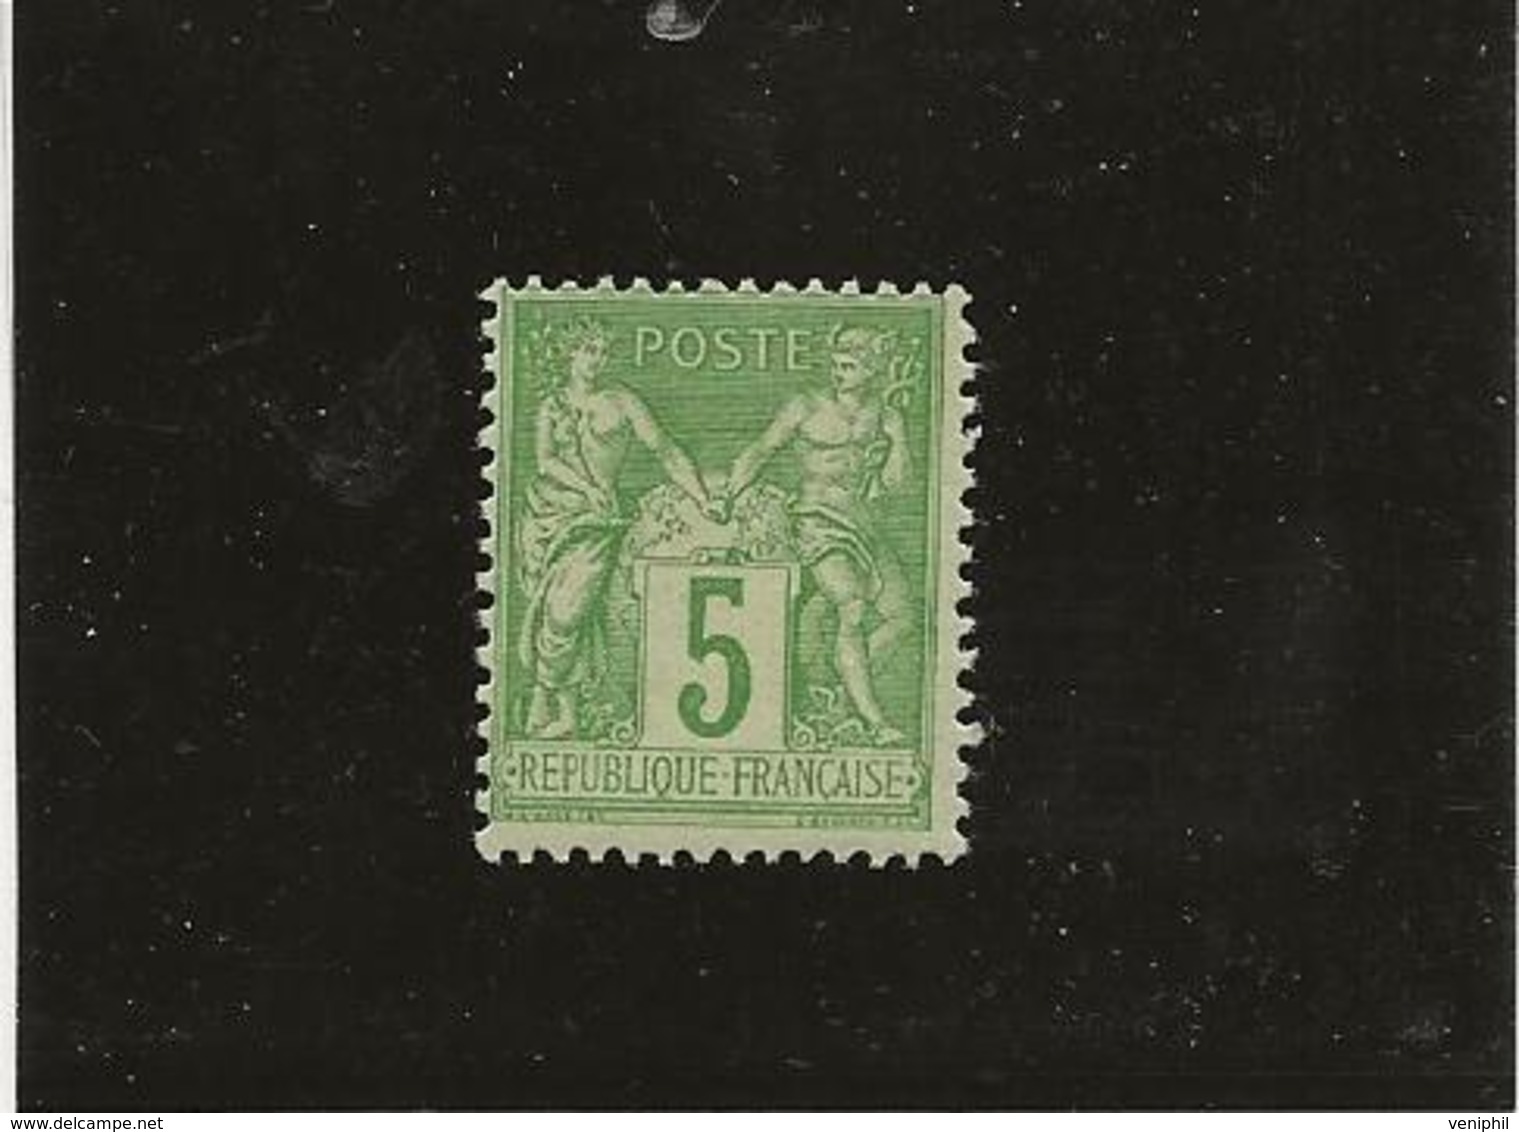 TIMBRE TYPE SAGE N° 106 - NEUF TRES INFIME CHARNIERE - ANNEE 1898 - COTE : 50 € - 1876-1898 Sage (Tipo II)